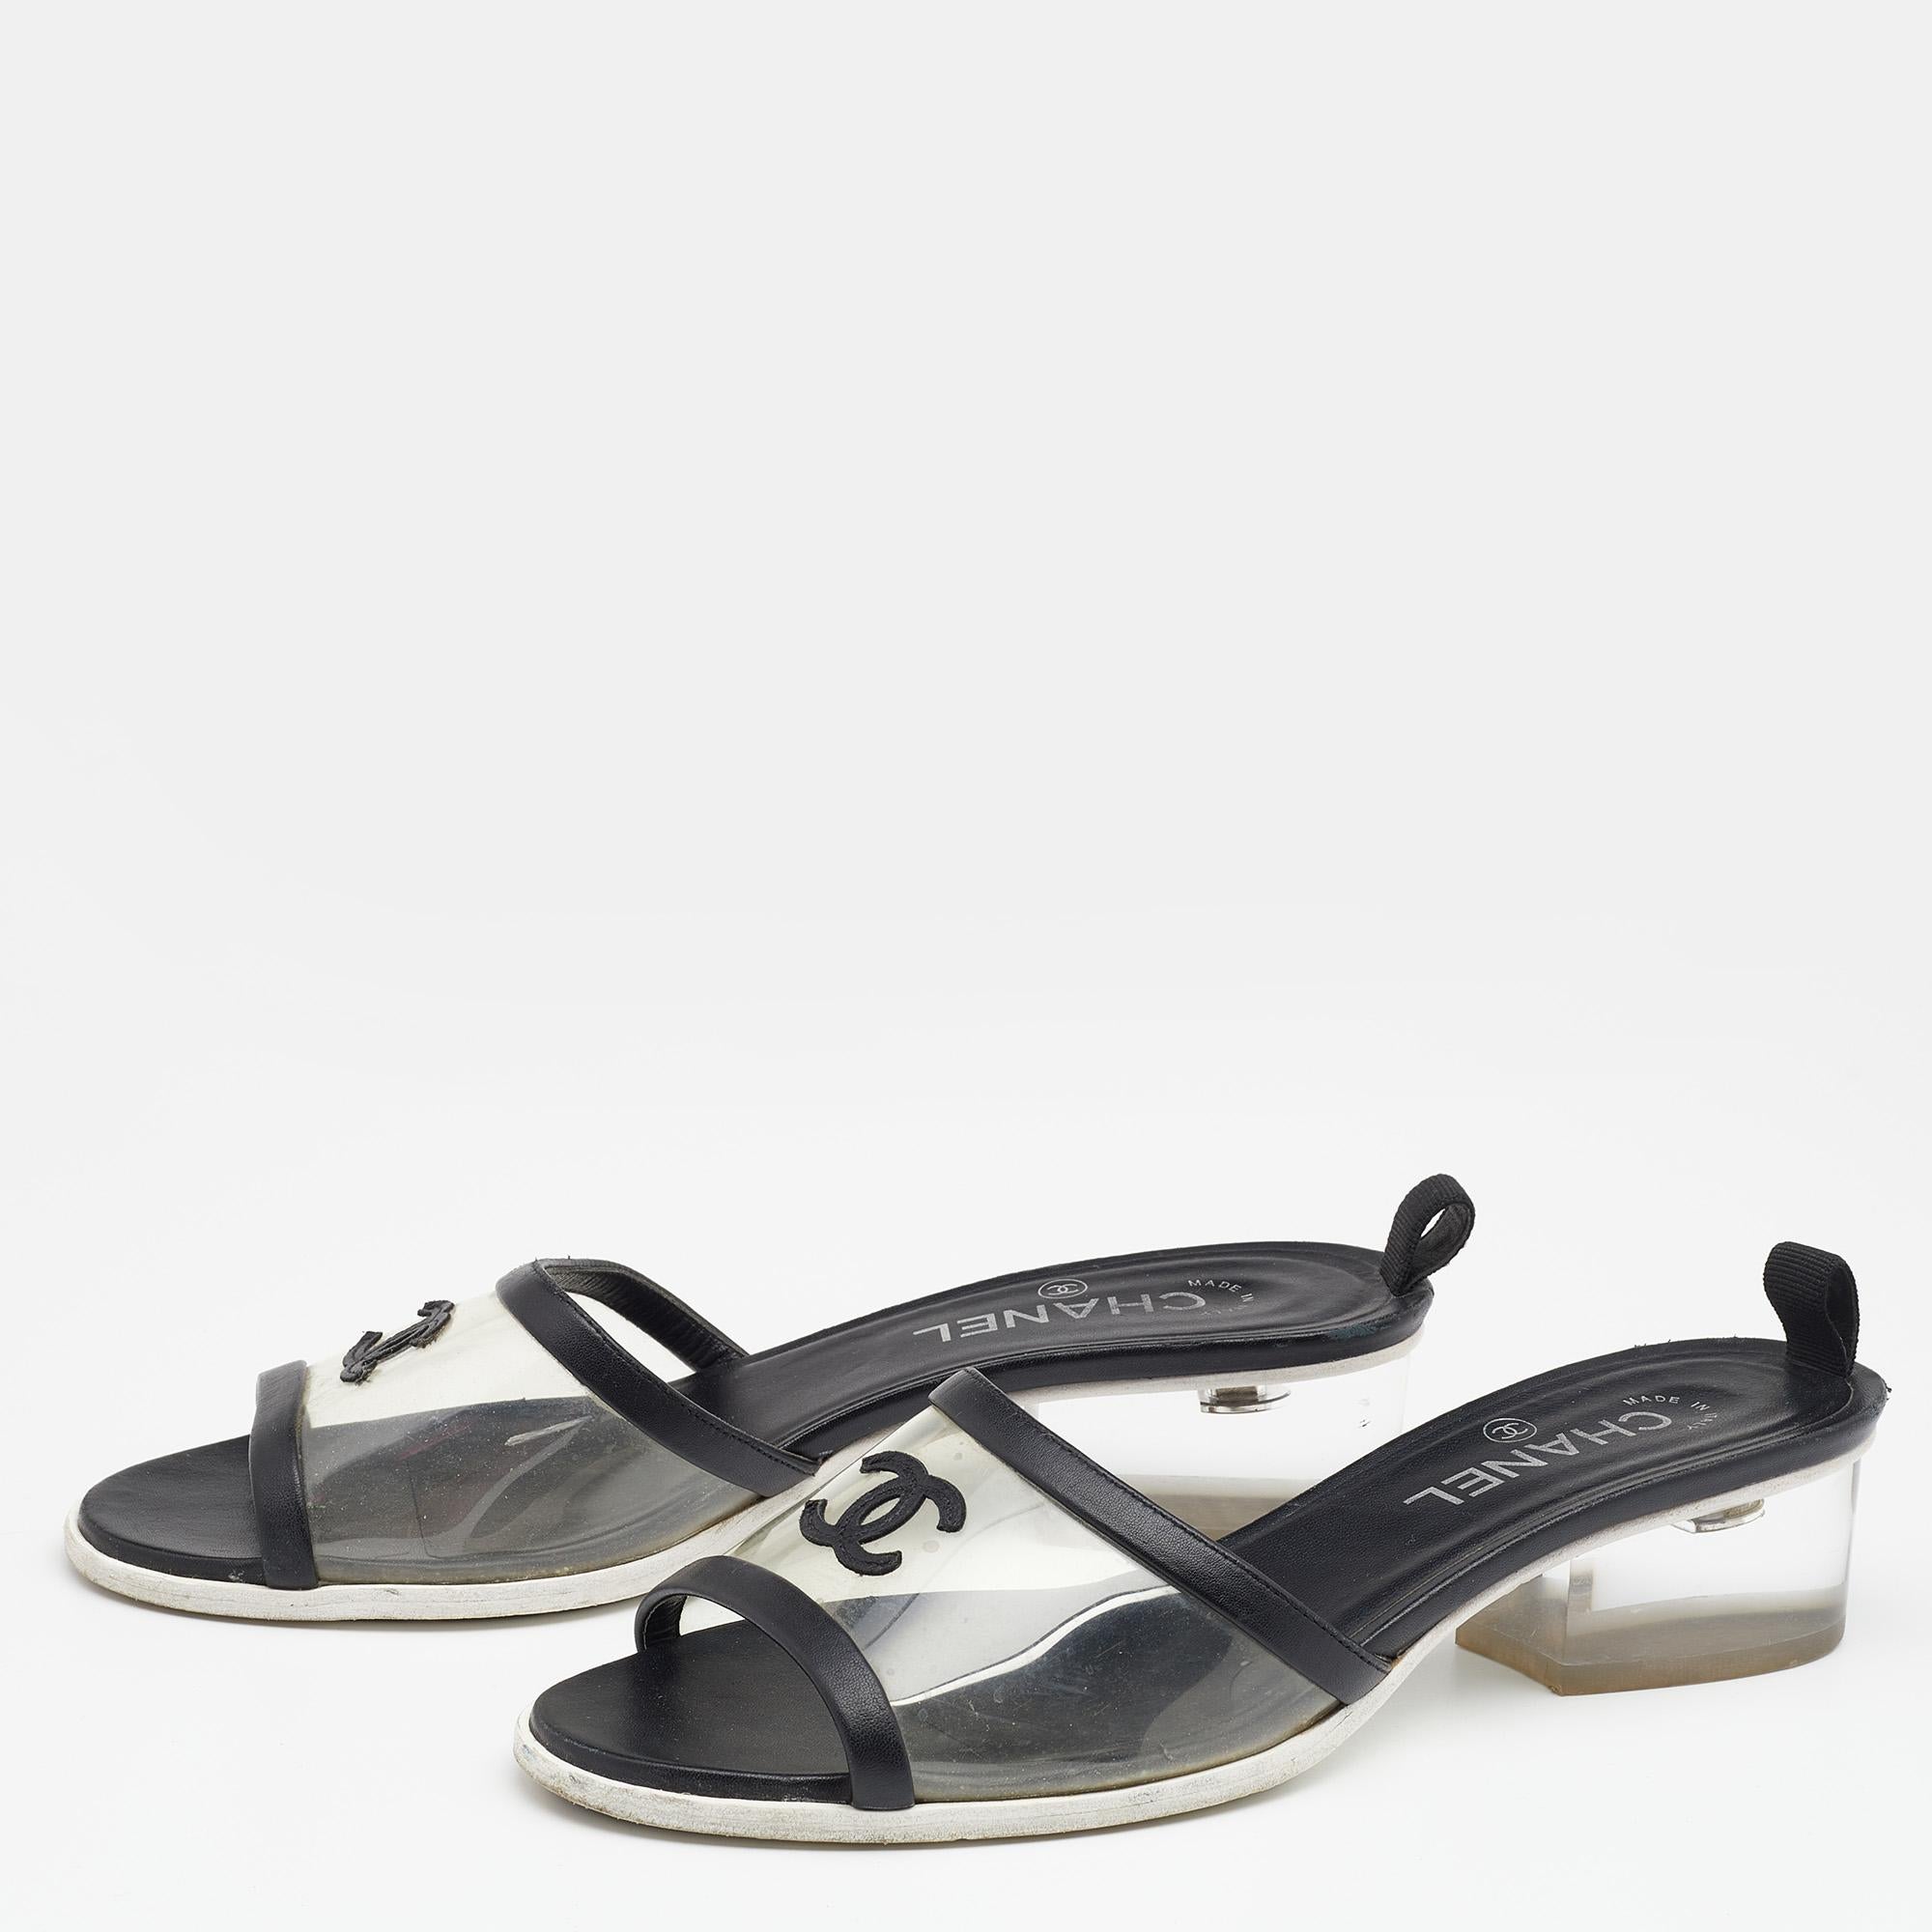 These slides from Chanel are simple and sophisticated. They are crafted from black leather and PVC, designed with open toes and CC logo-detailed vamp straps, and are endowed with smooth insoles. They stand on sturdy, clear block heels and tough